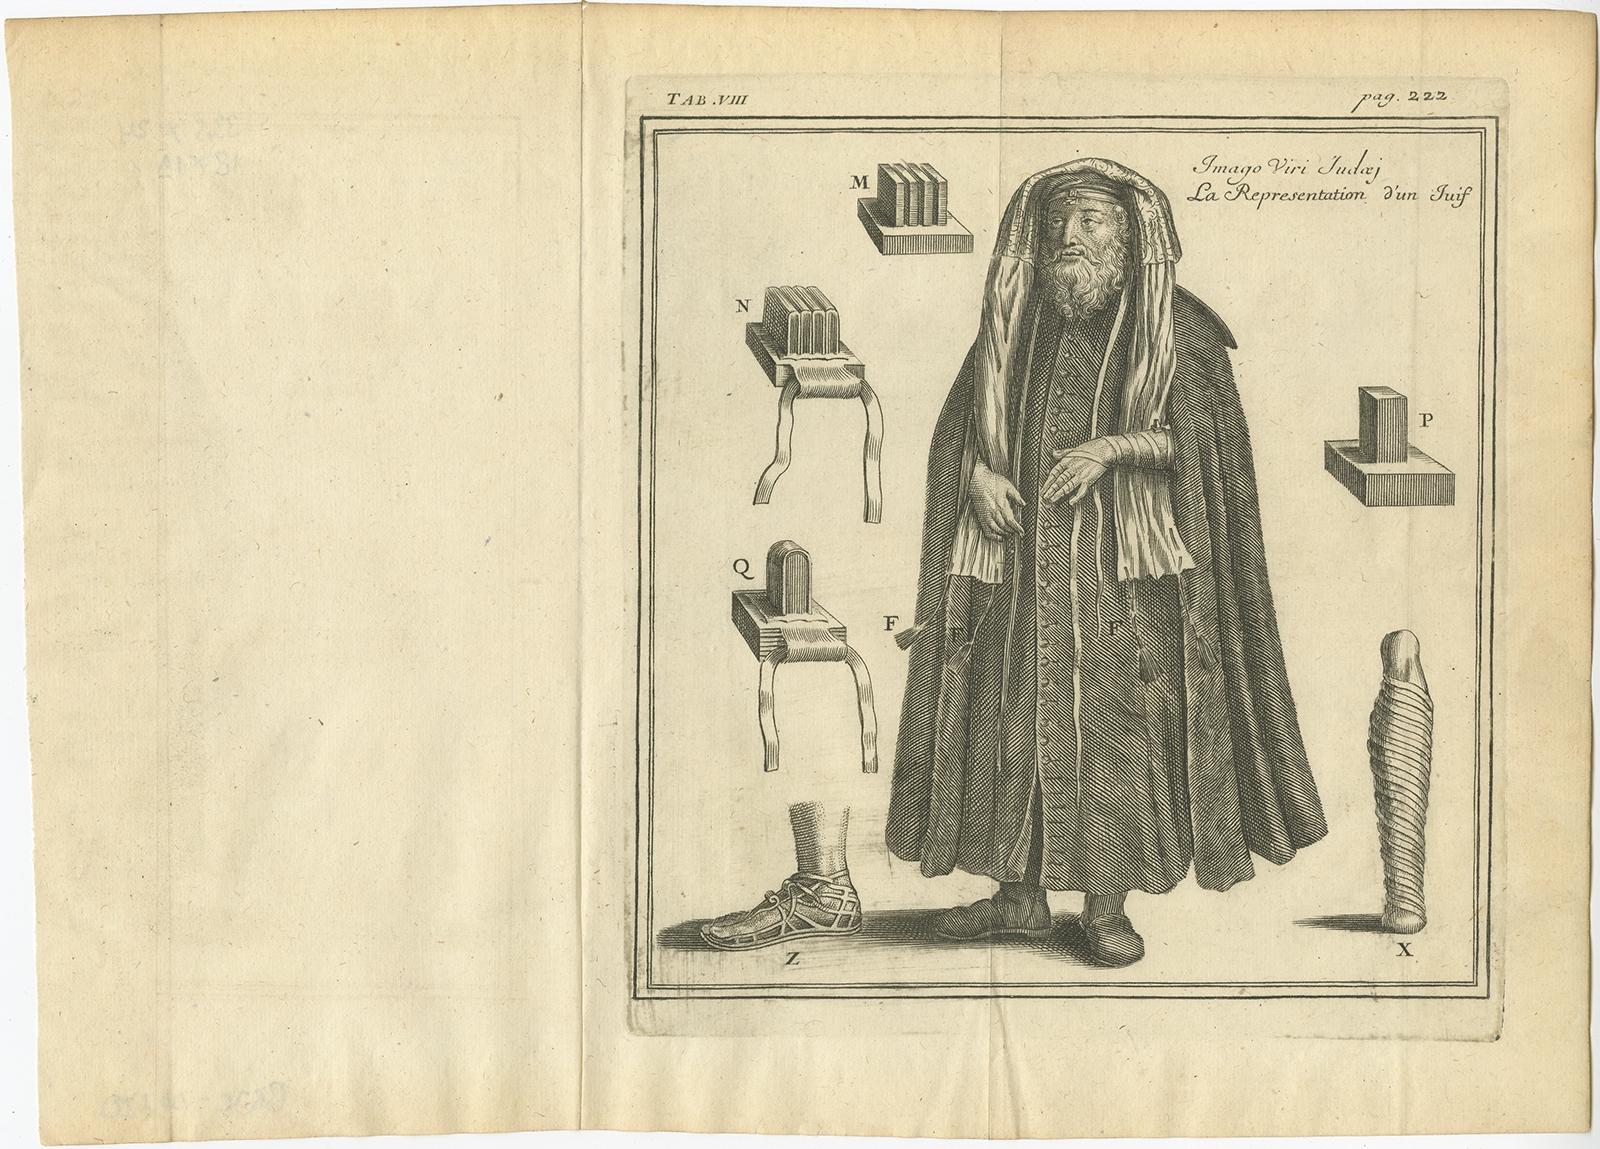 Antique print titled 'La Representation d'un Juif'. 

Antique print depicting a jew, illustrating various elements of a costume. Small but this authentique copper engraving will look very decorative on your wall in a nice frame.

This print